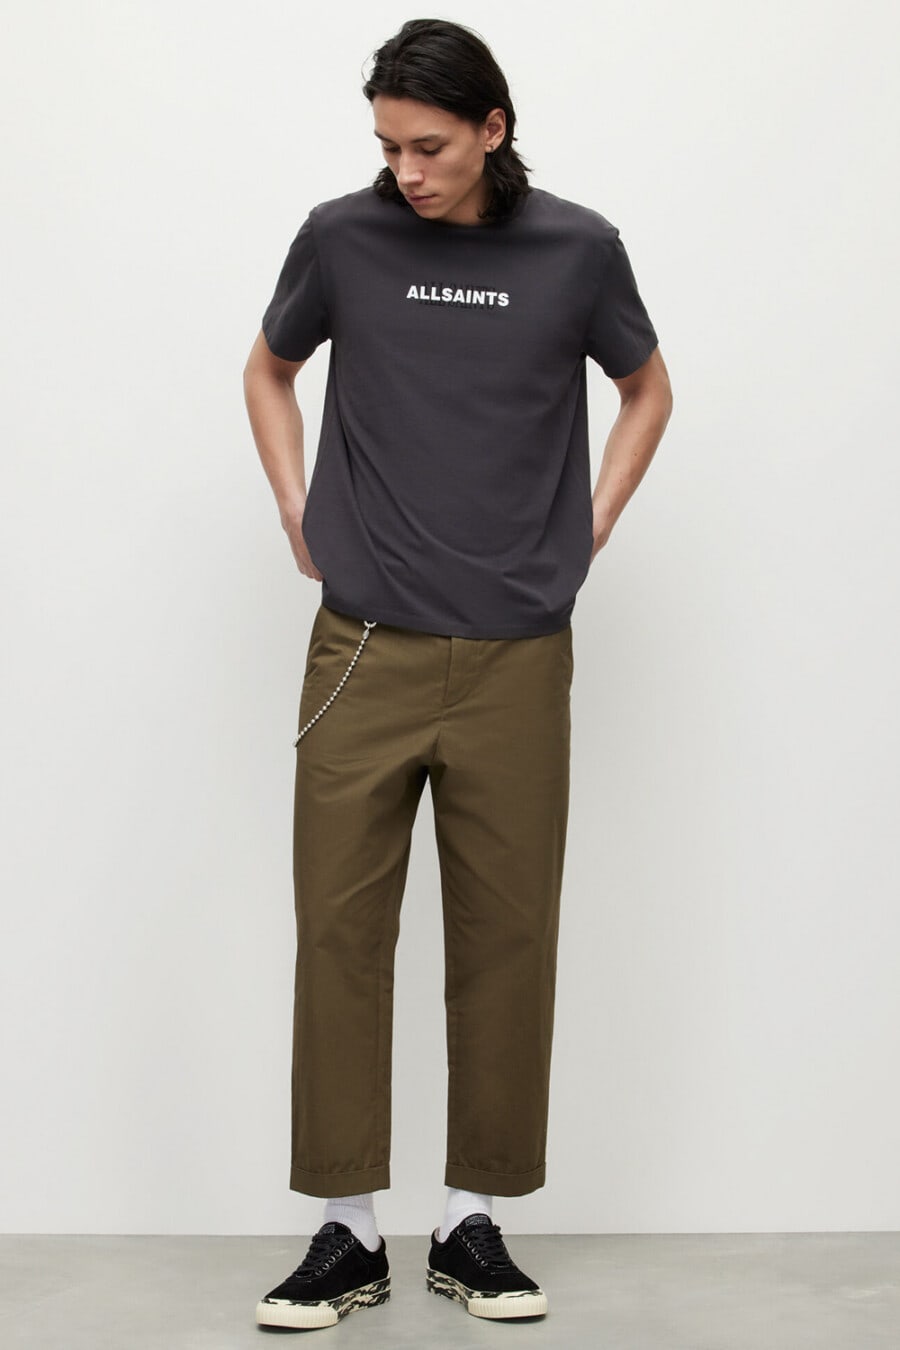 Men's khaki green cropped wide-leg chinos, black logo T-shirt, white socks, black canvas sneakers and wallet chain outfit 